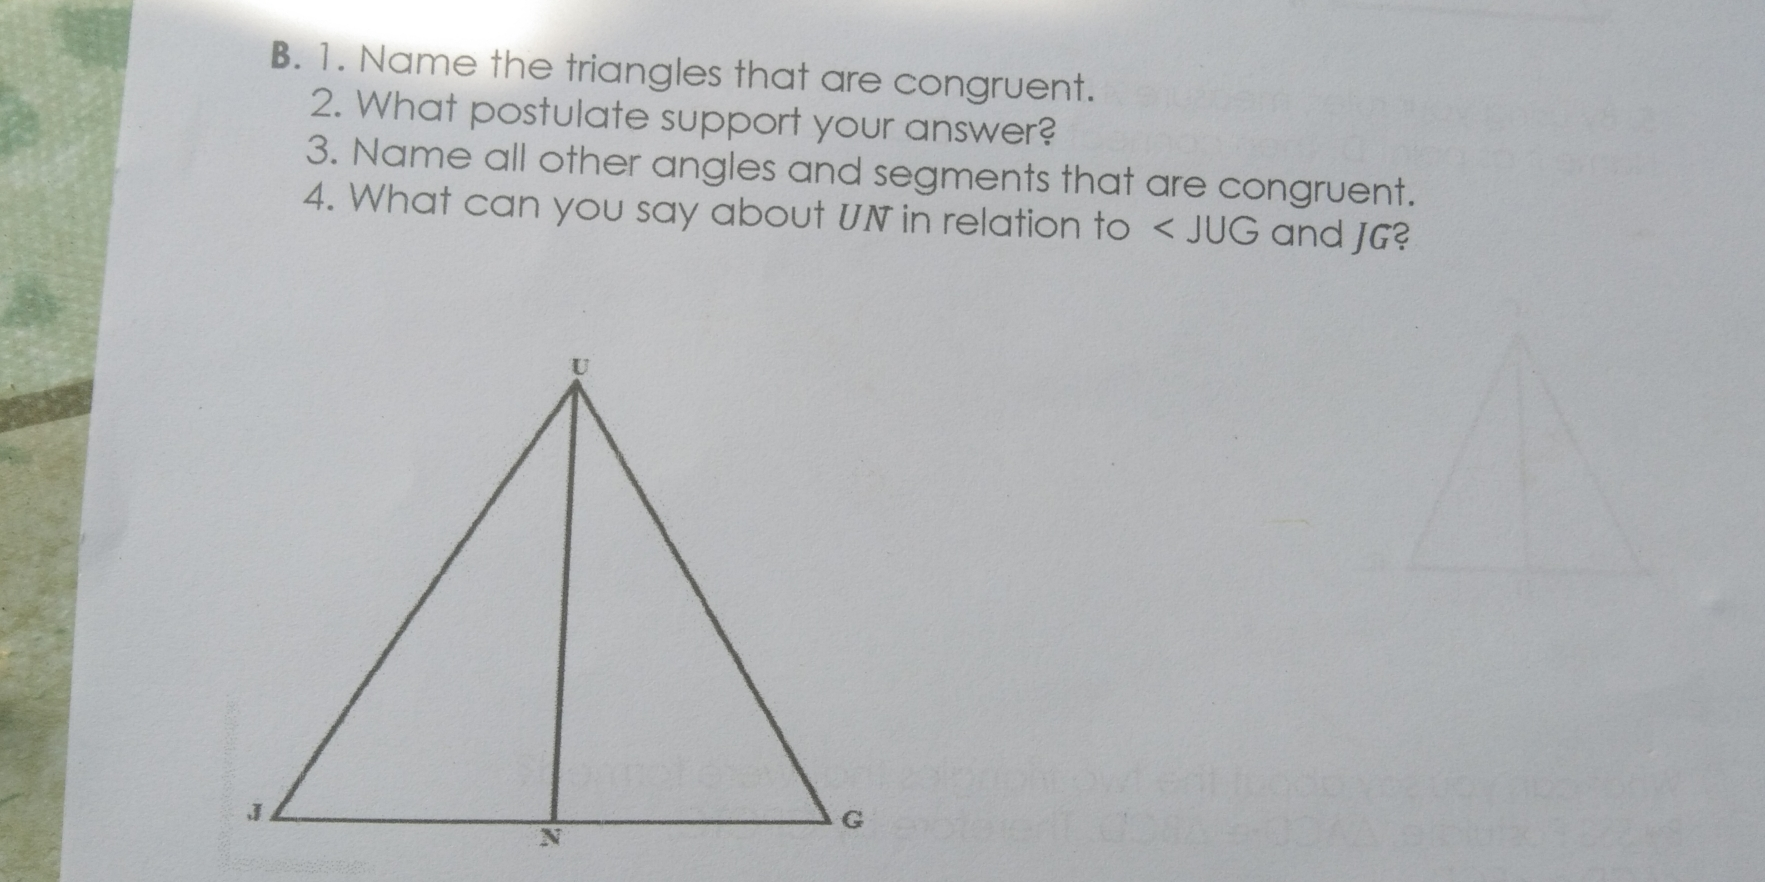 B. 1. Name the triangles that are congruent. 2. What postulate support your answer? 3. Name all other angles and segments that are congruent. 4. What can you say about UN in relation to